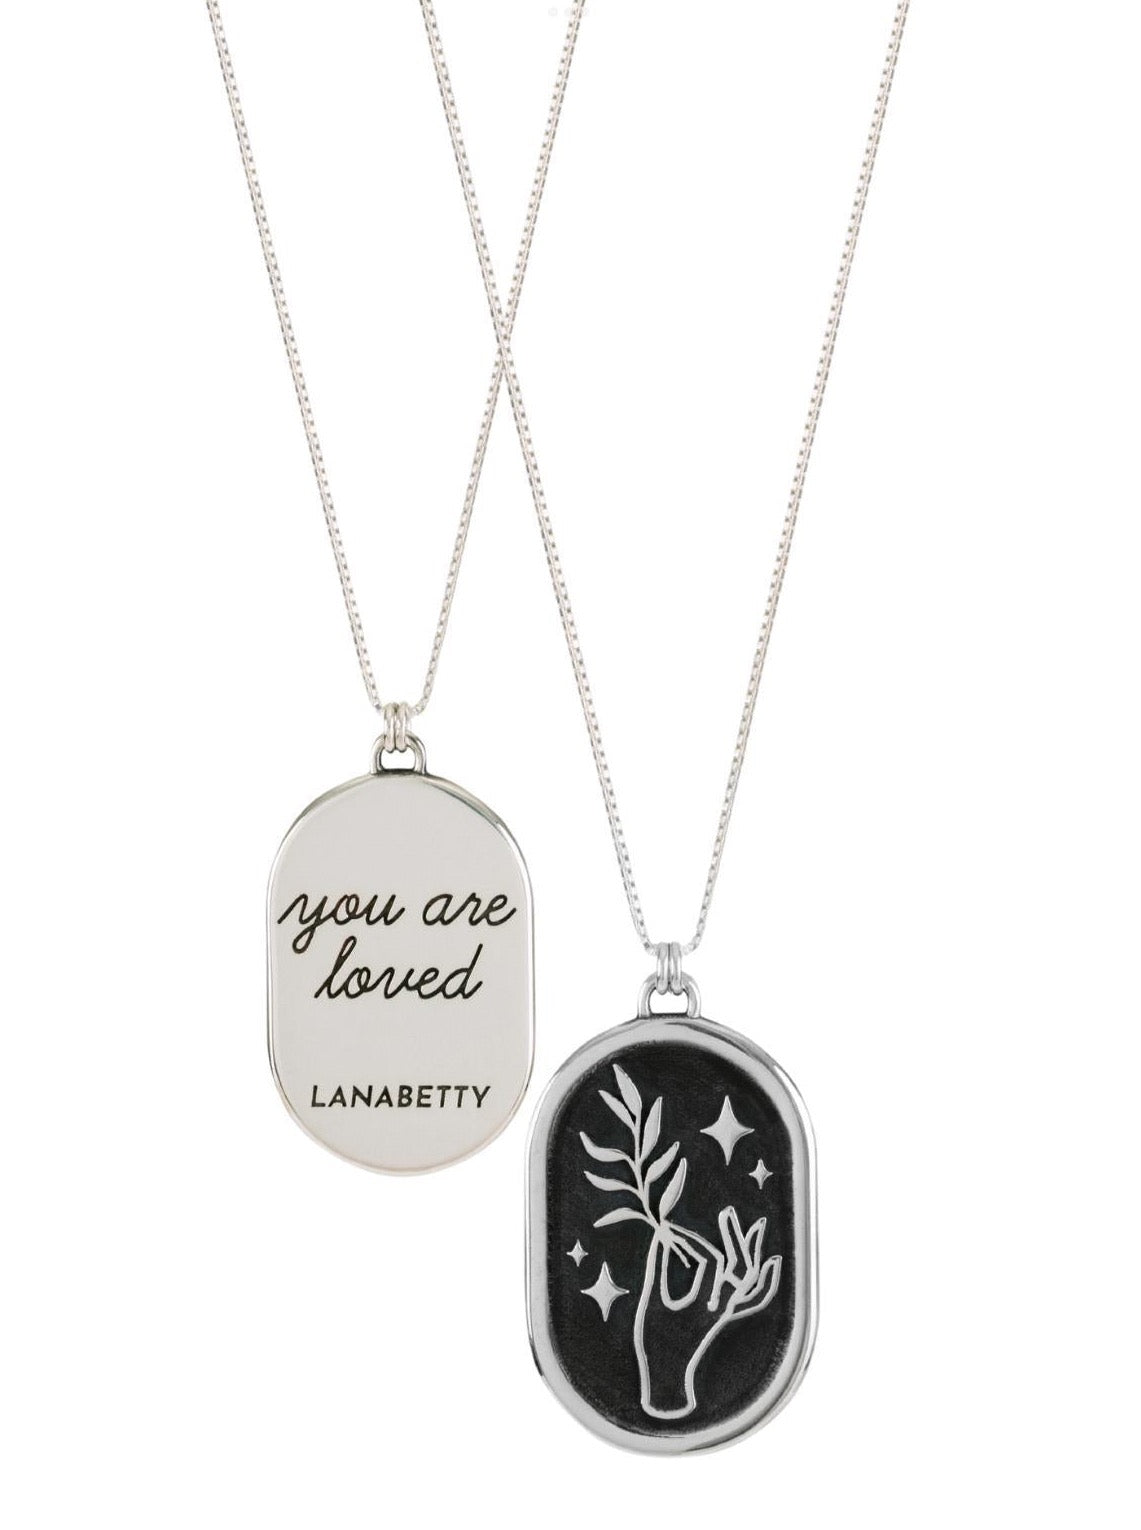 You Are Loved Sterling Silver Mantra Necklace with 24” chain by Lanabetty